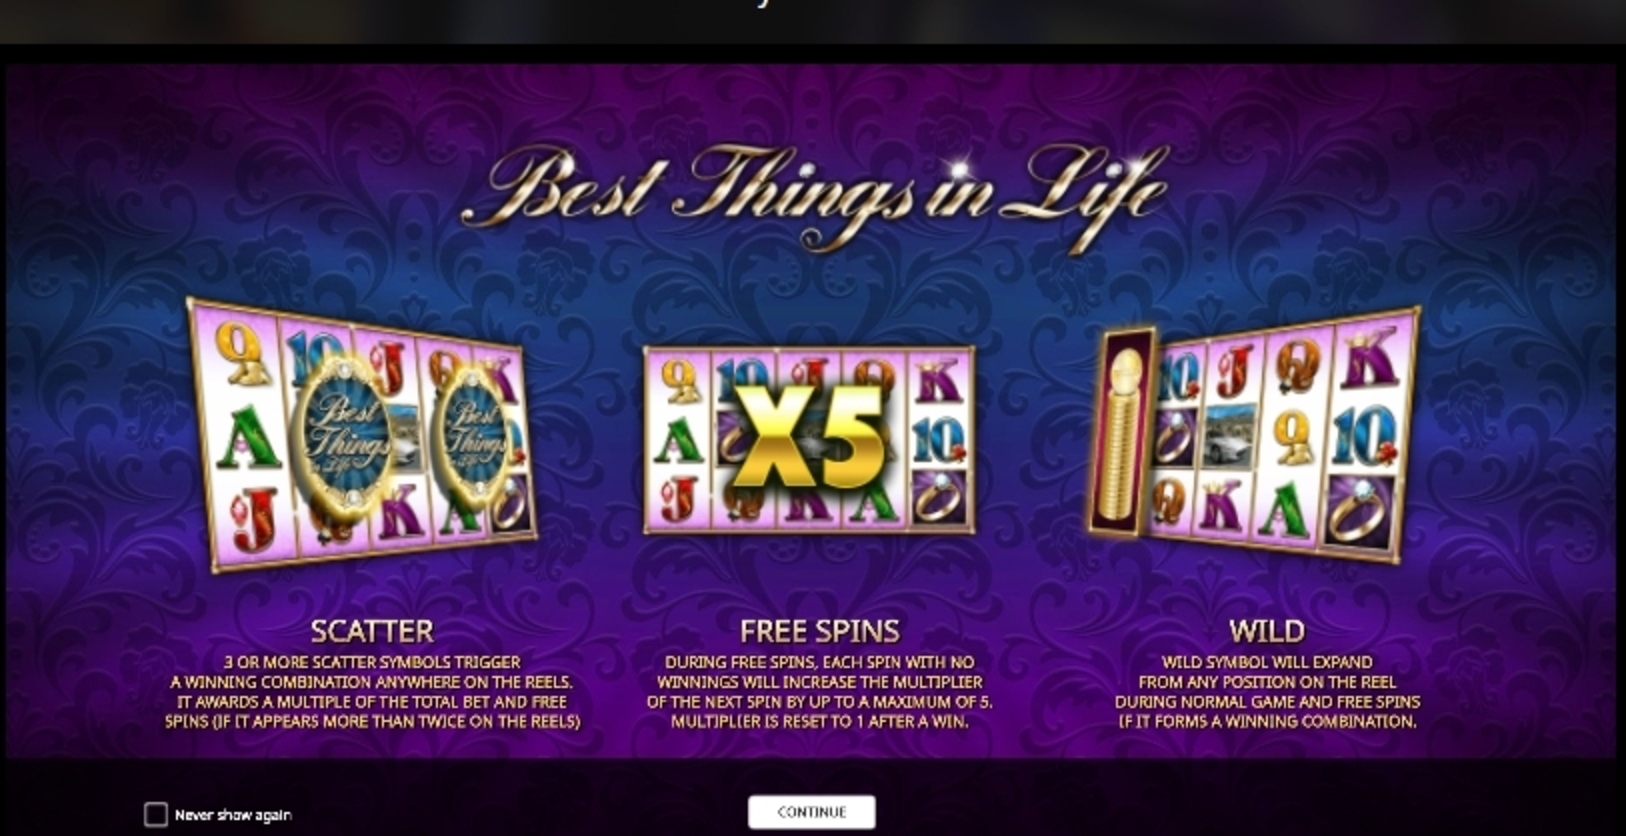 Play Best Things in Life Free Casino Slot Game by iSoftBet